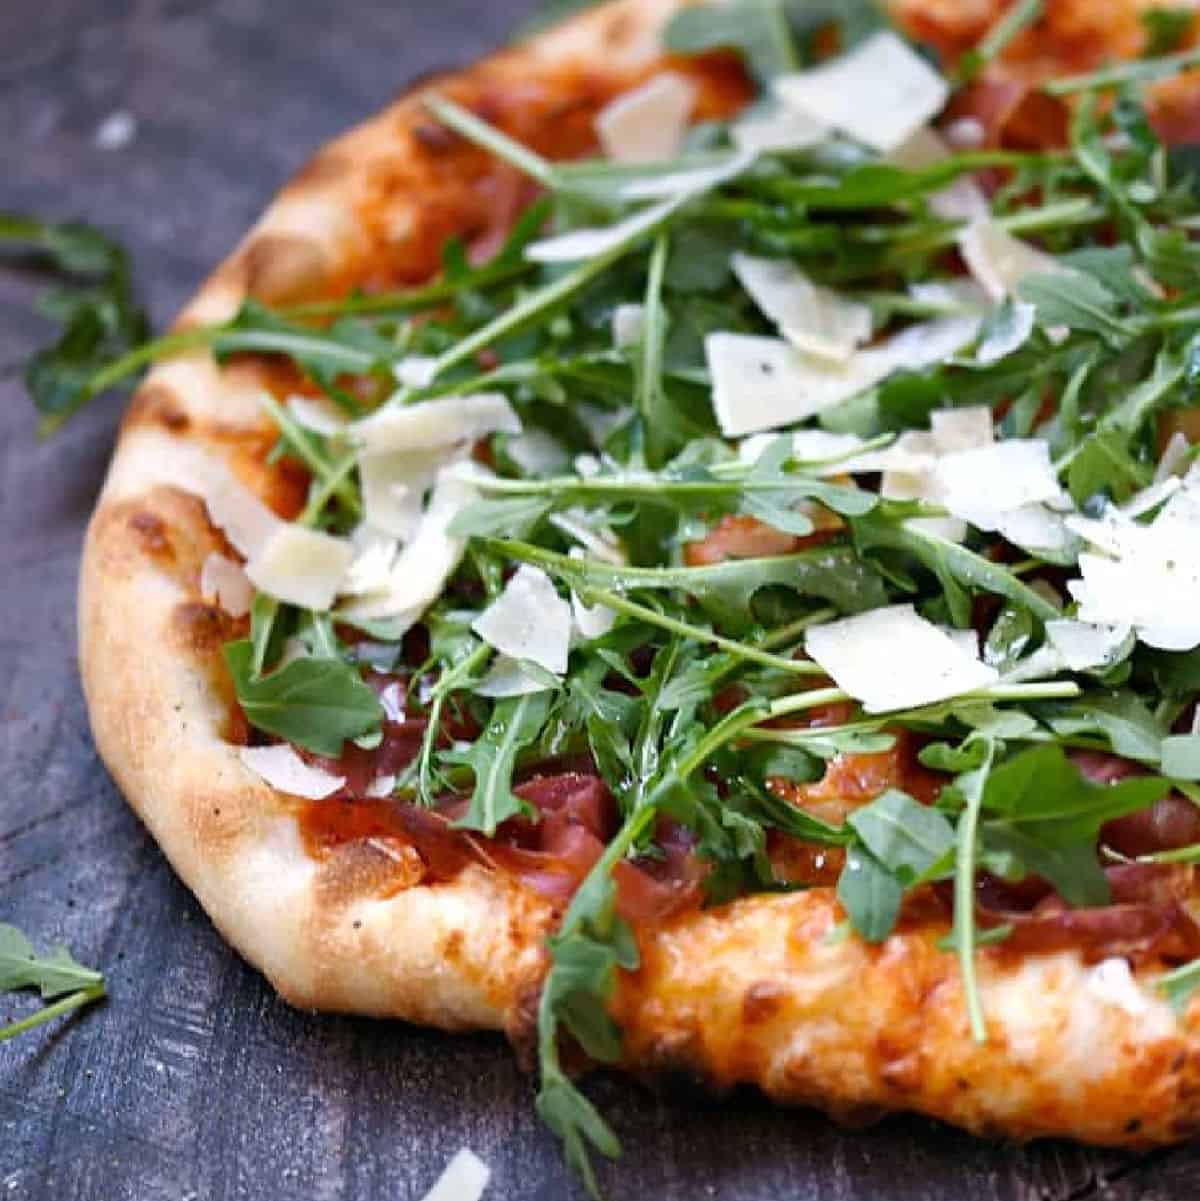 Pizza topped with prosciutto slices, arugula, and shaved parmesan cheese.